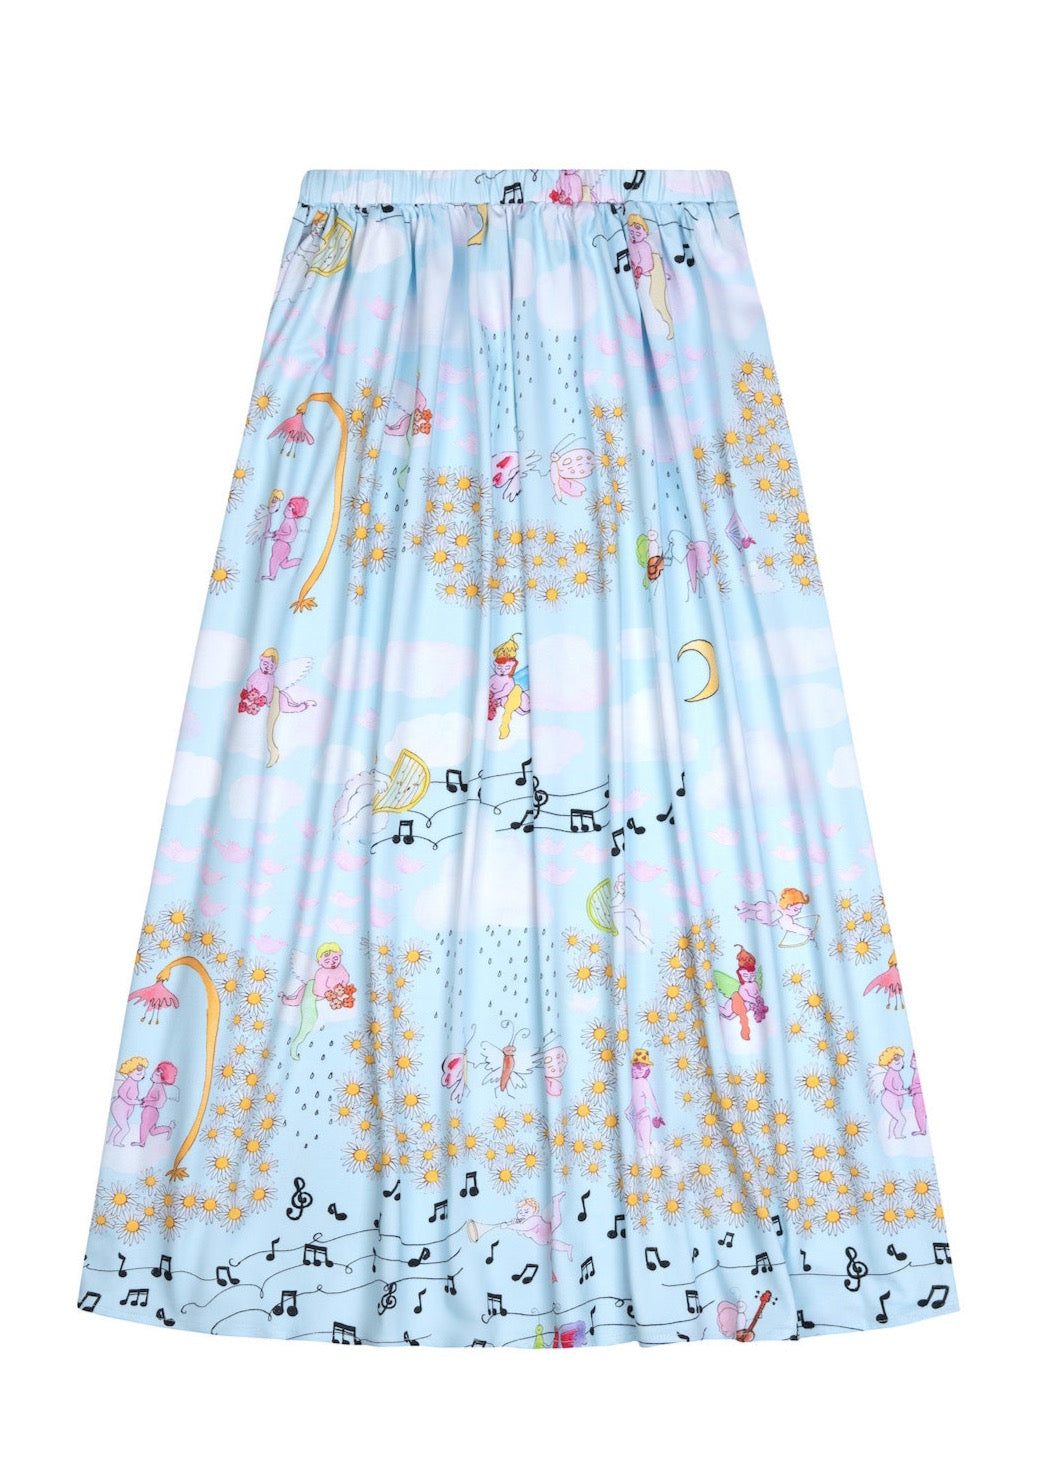 The perfect pull-on skirt in Bad Girls Go to Heaven print. Meticulously joyful, Bad Girls Go to Heaven features hand-illustrated in happy dancing bugs and high-flying cherubs.